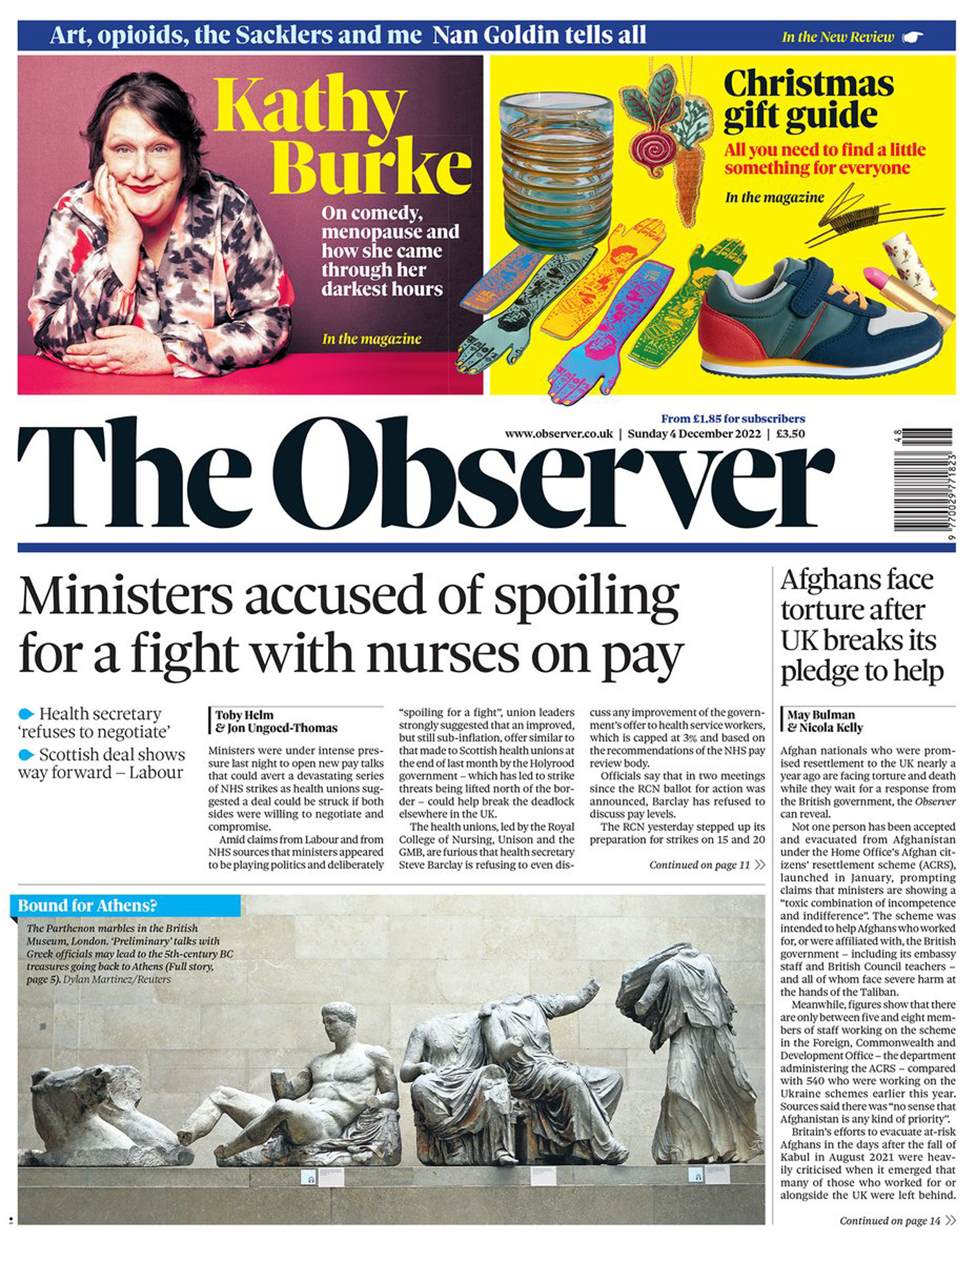 Front cover of the Observer, 4 December